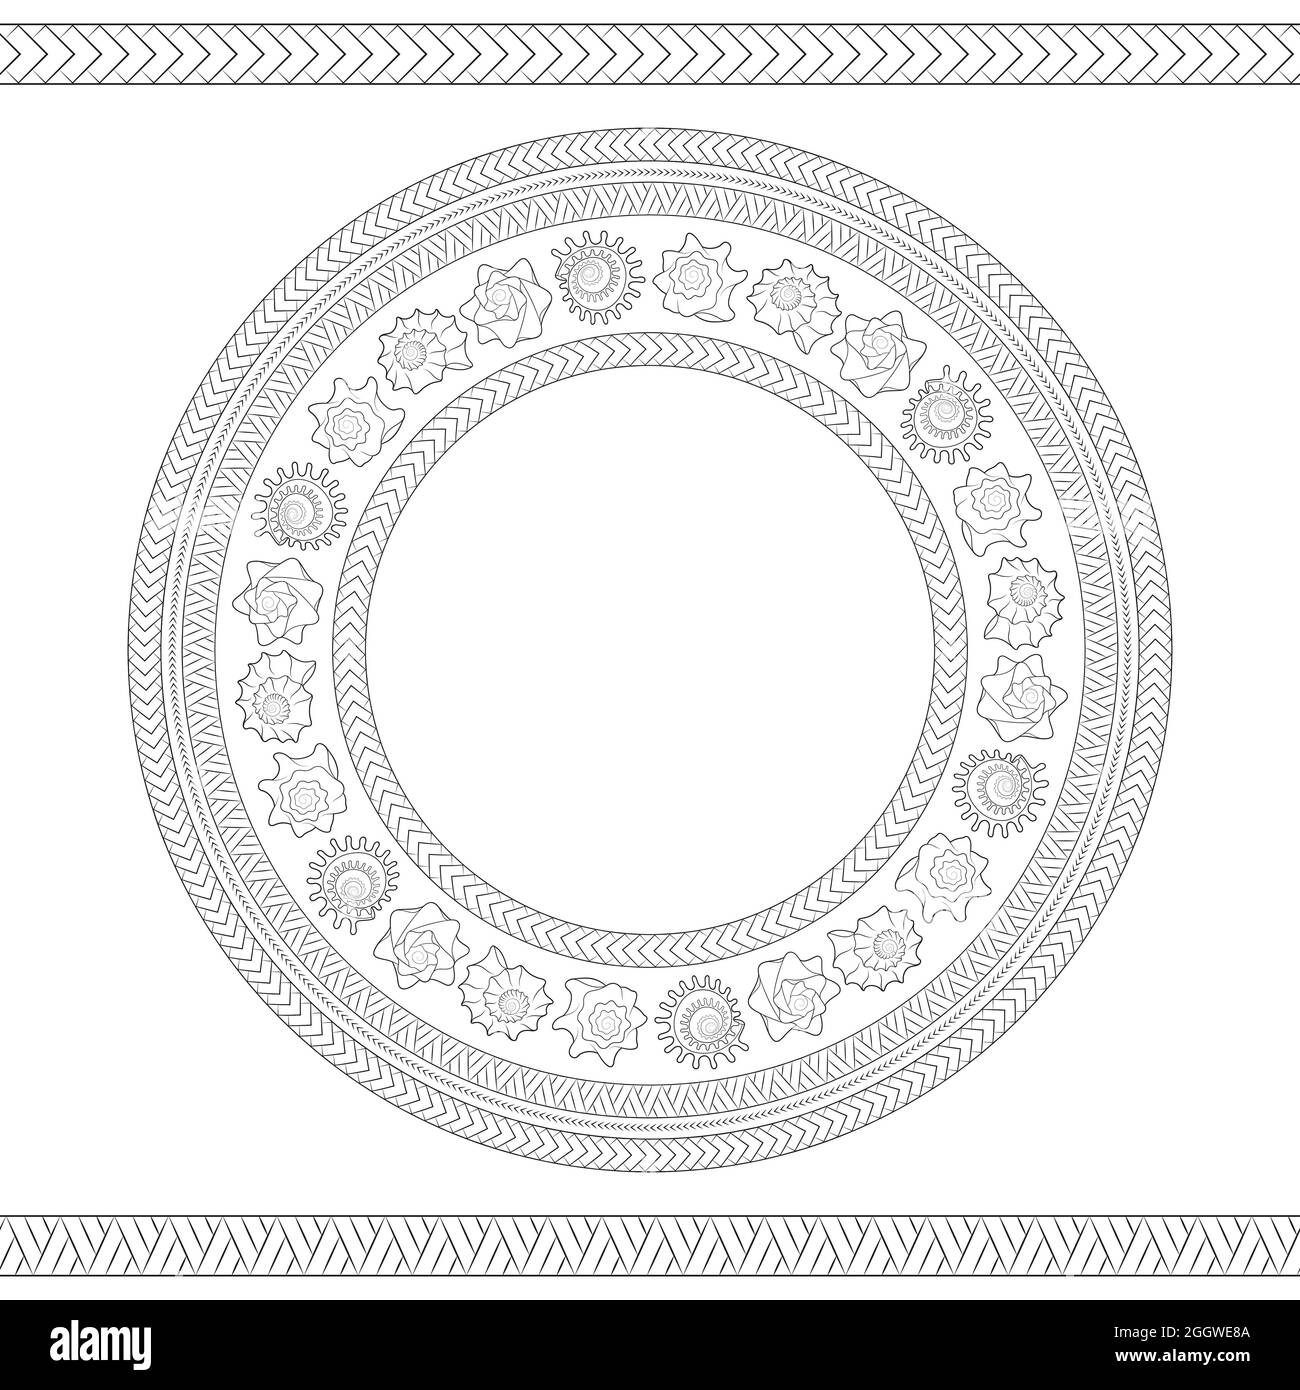 Seamless pattern with shells and Polynesian patterns. Vector black and white round illustration. Stock Vector